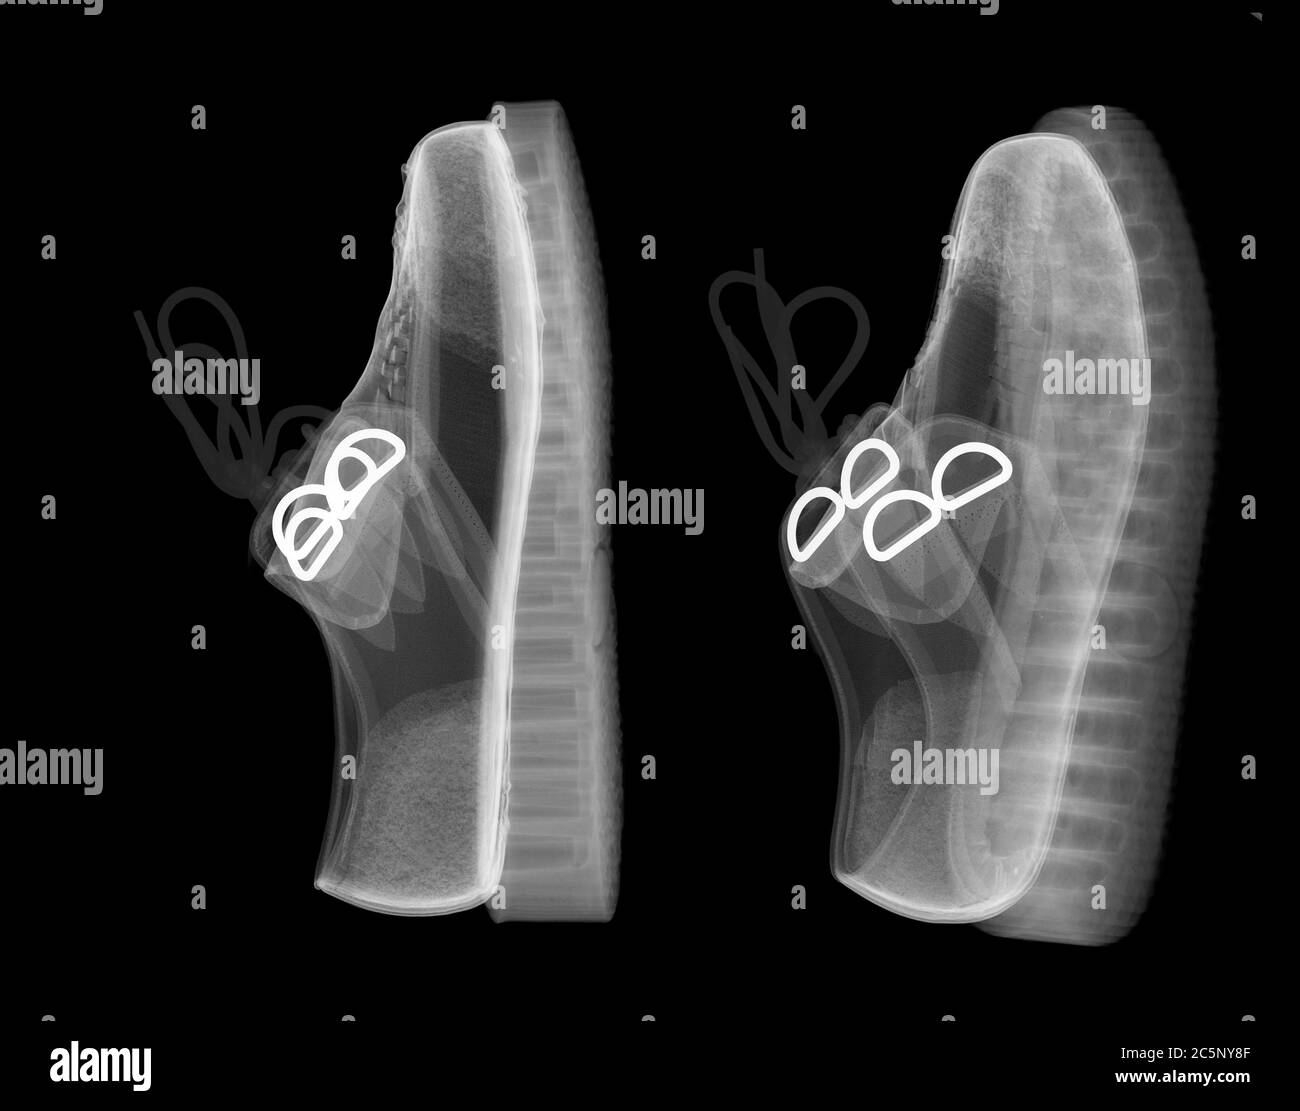 Shoes, X-ray. Stock Photo